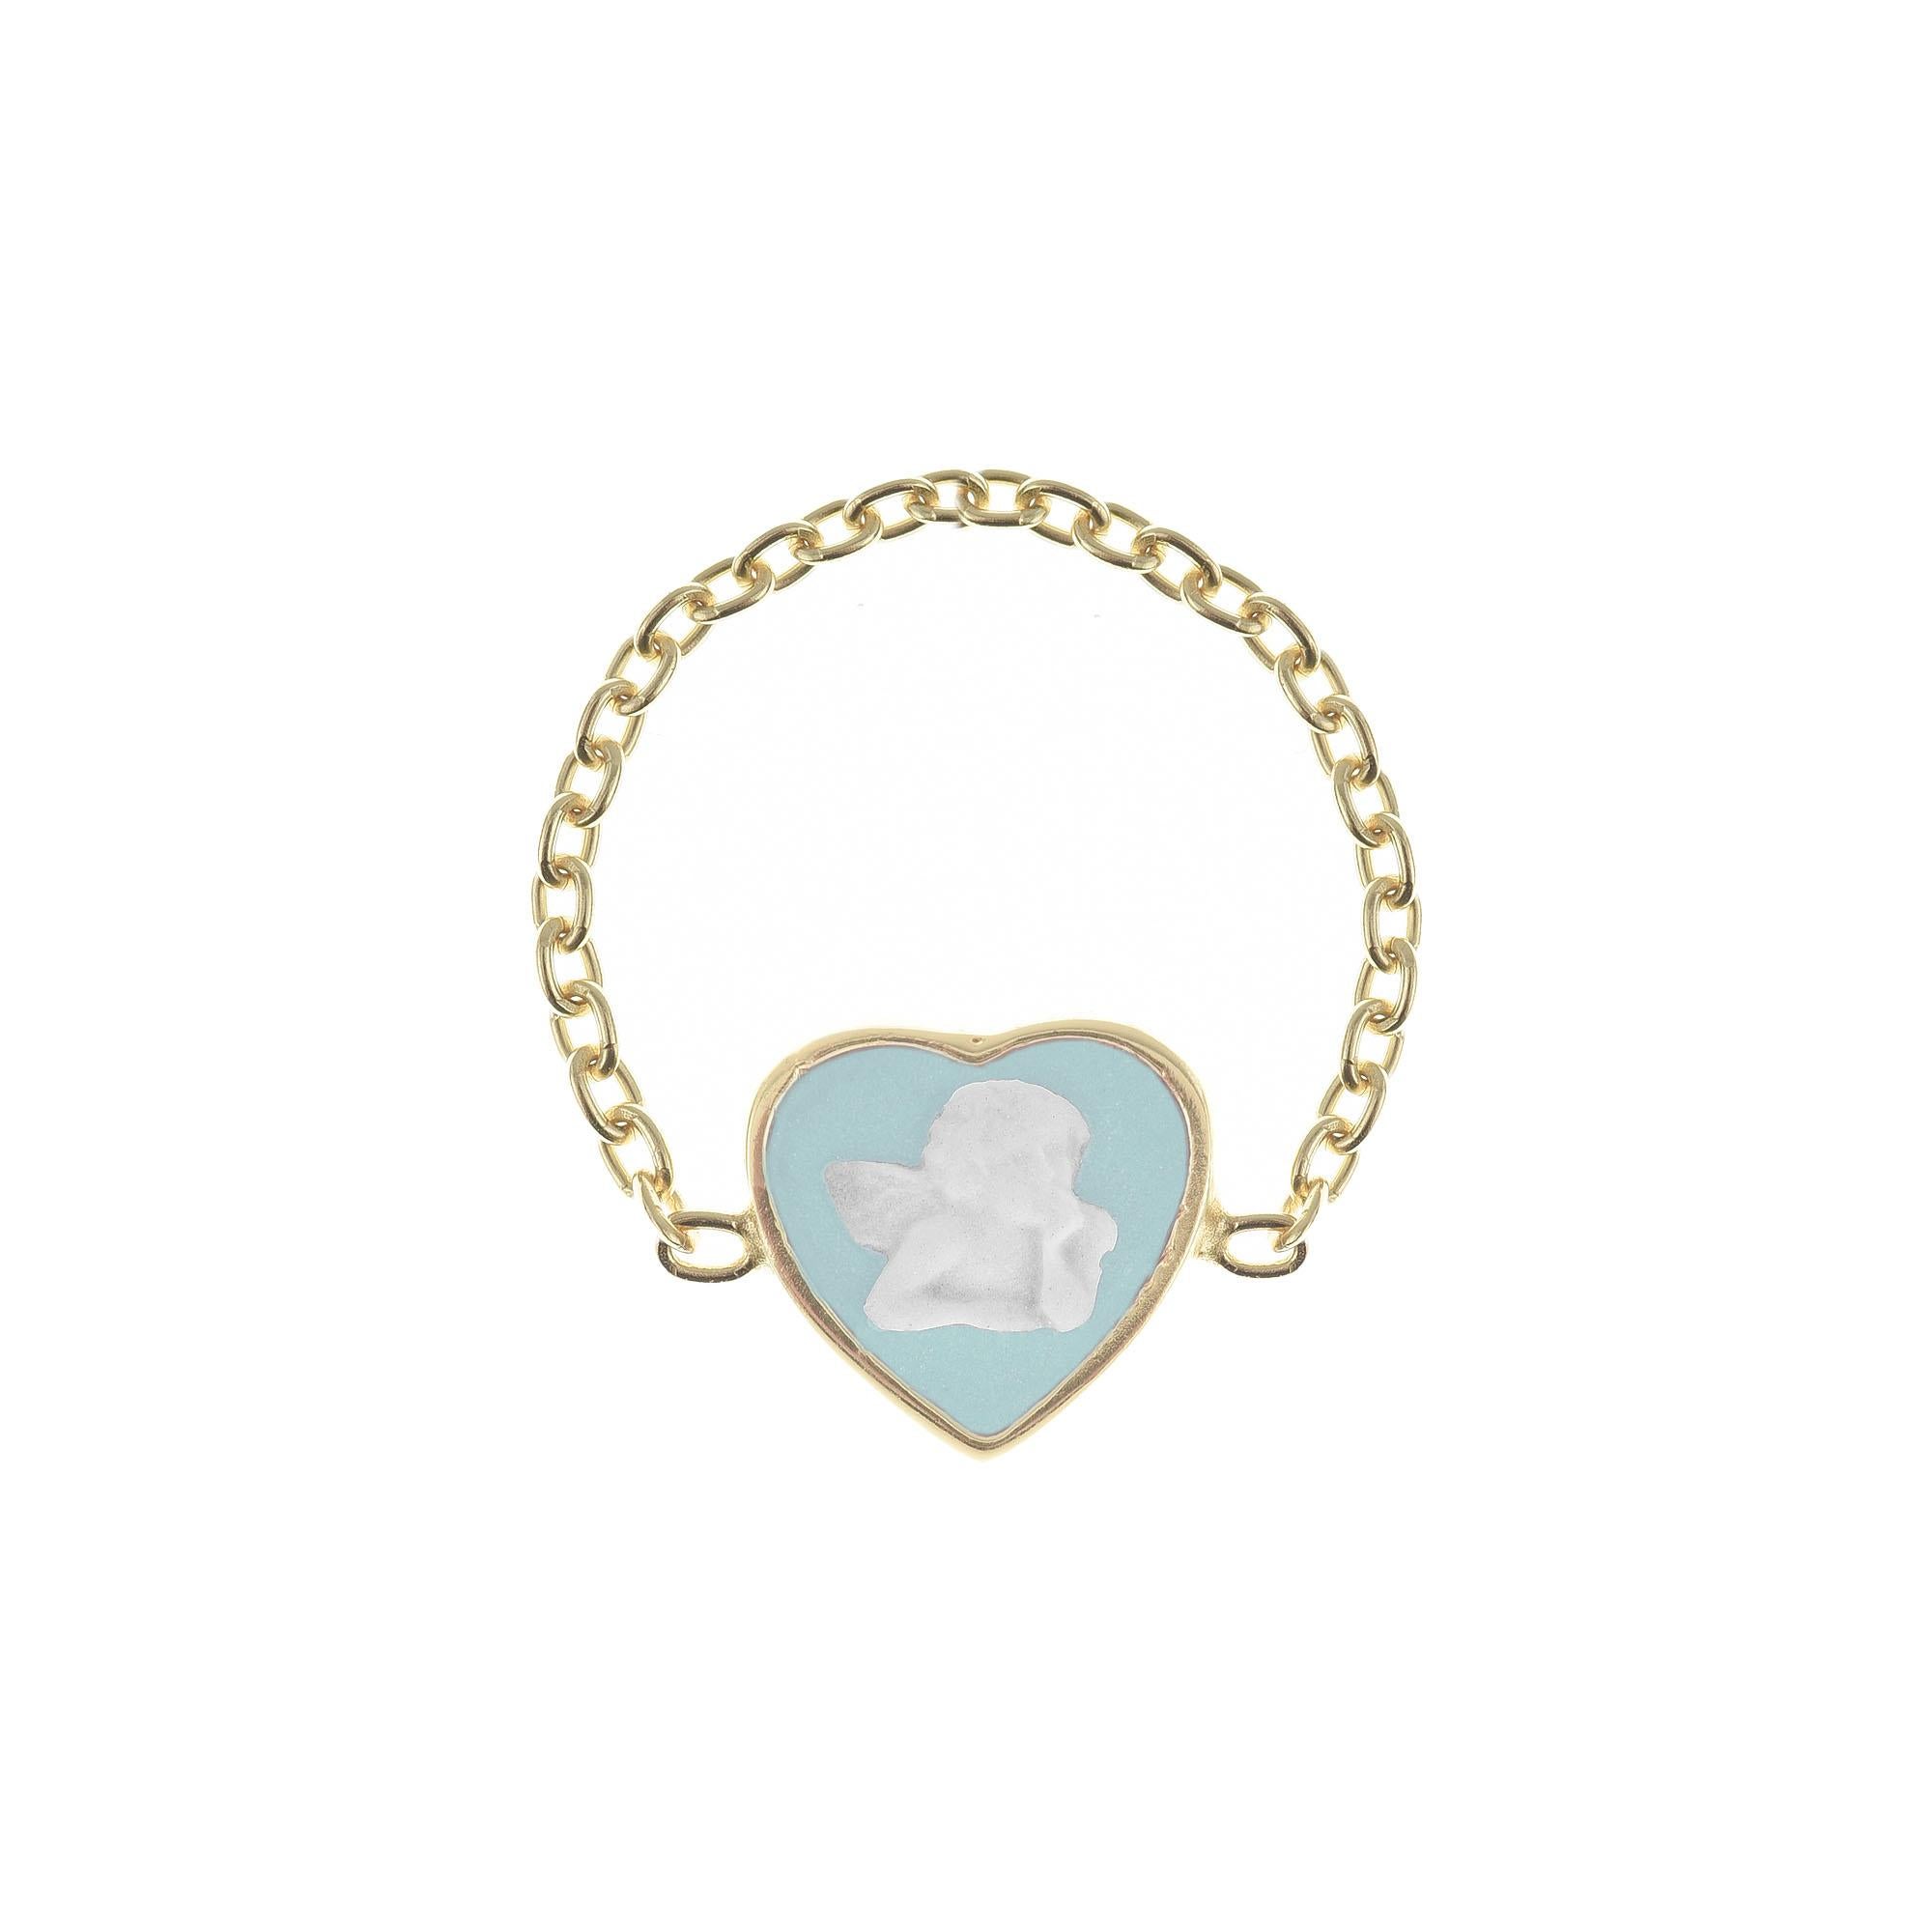 Beautifully hand crafted porcelain cameo chain ring mounted in 18k gold plated sterling silver. With a sweet look it depicts a little cherub, one of the most classic subject of cameo making. Sold as a set of two colors, pick your favourites from our